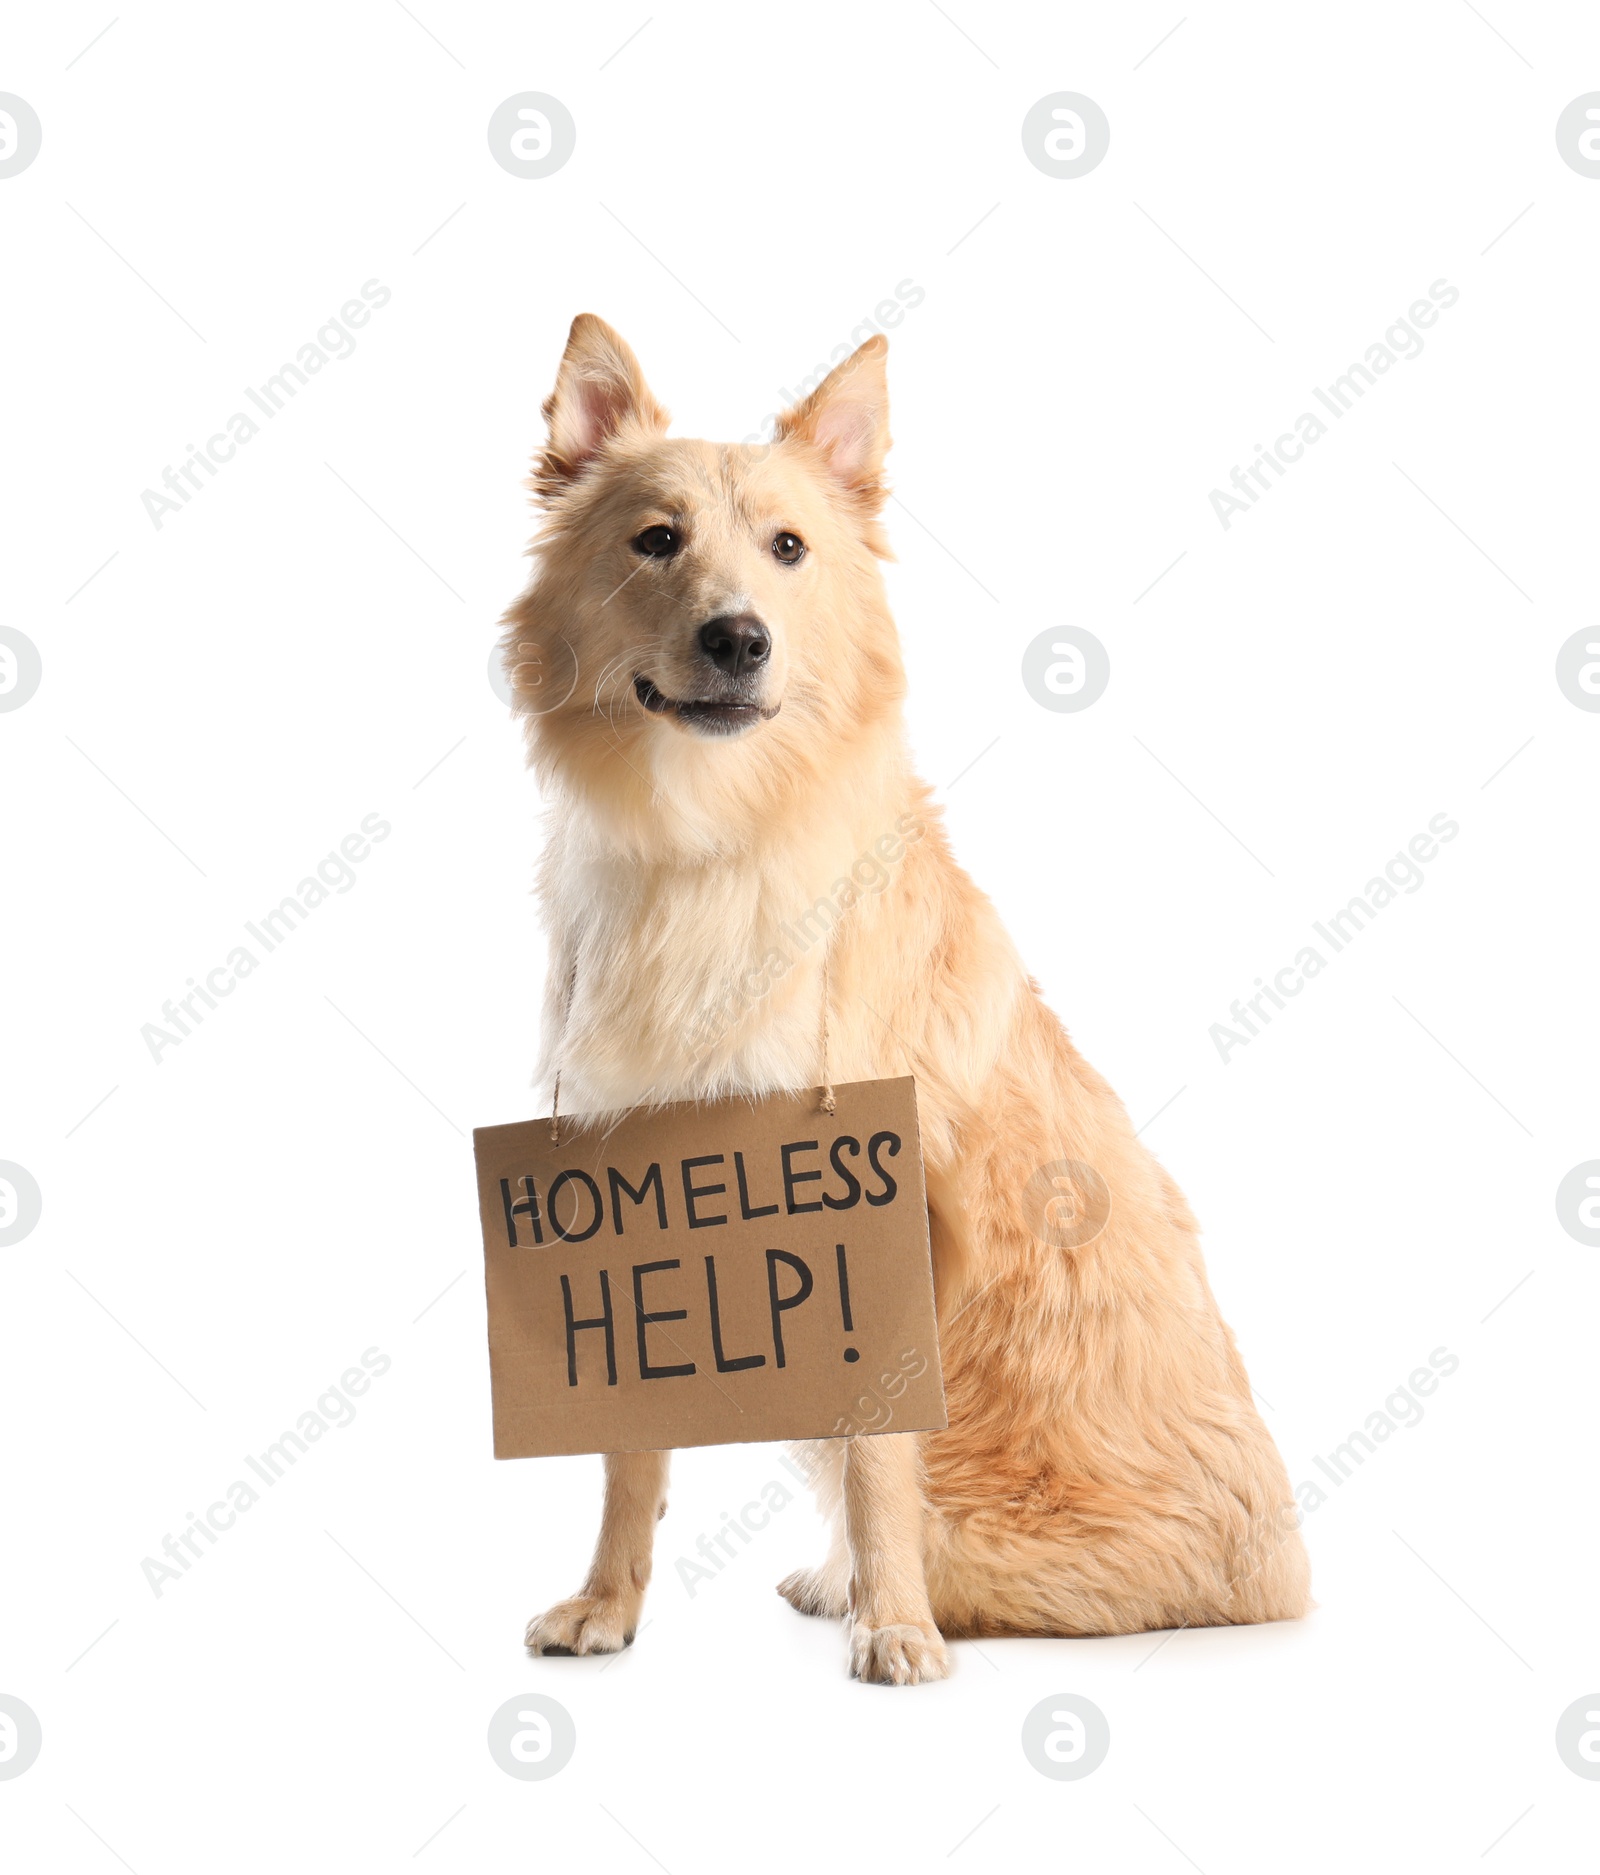 Photo of Lost dog with sign Homeless Help! on white background. Lonely pet